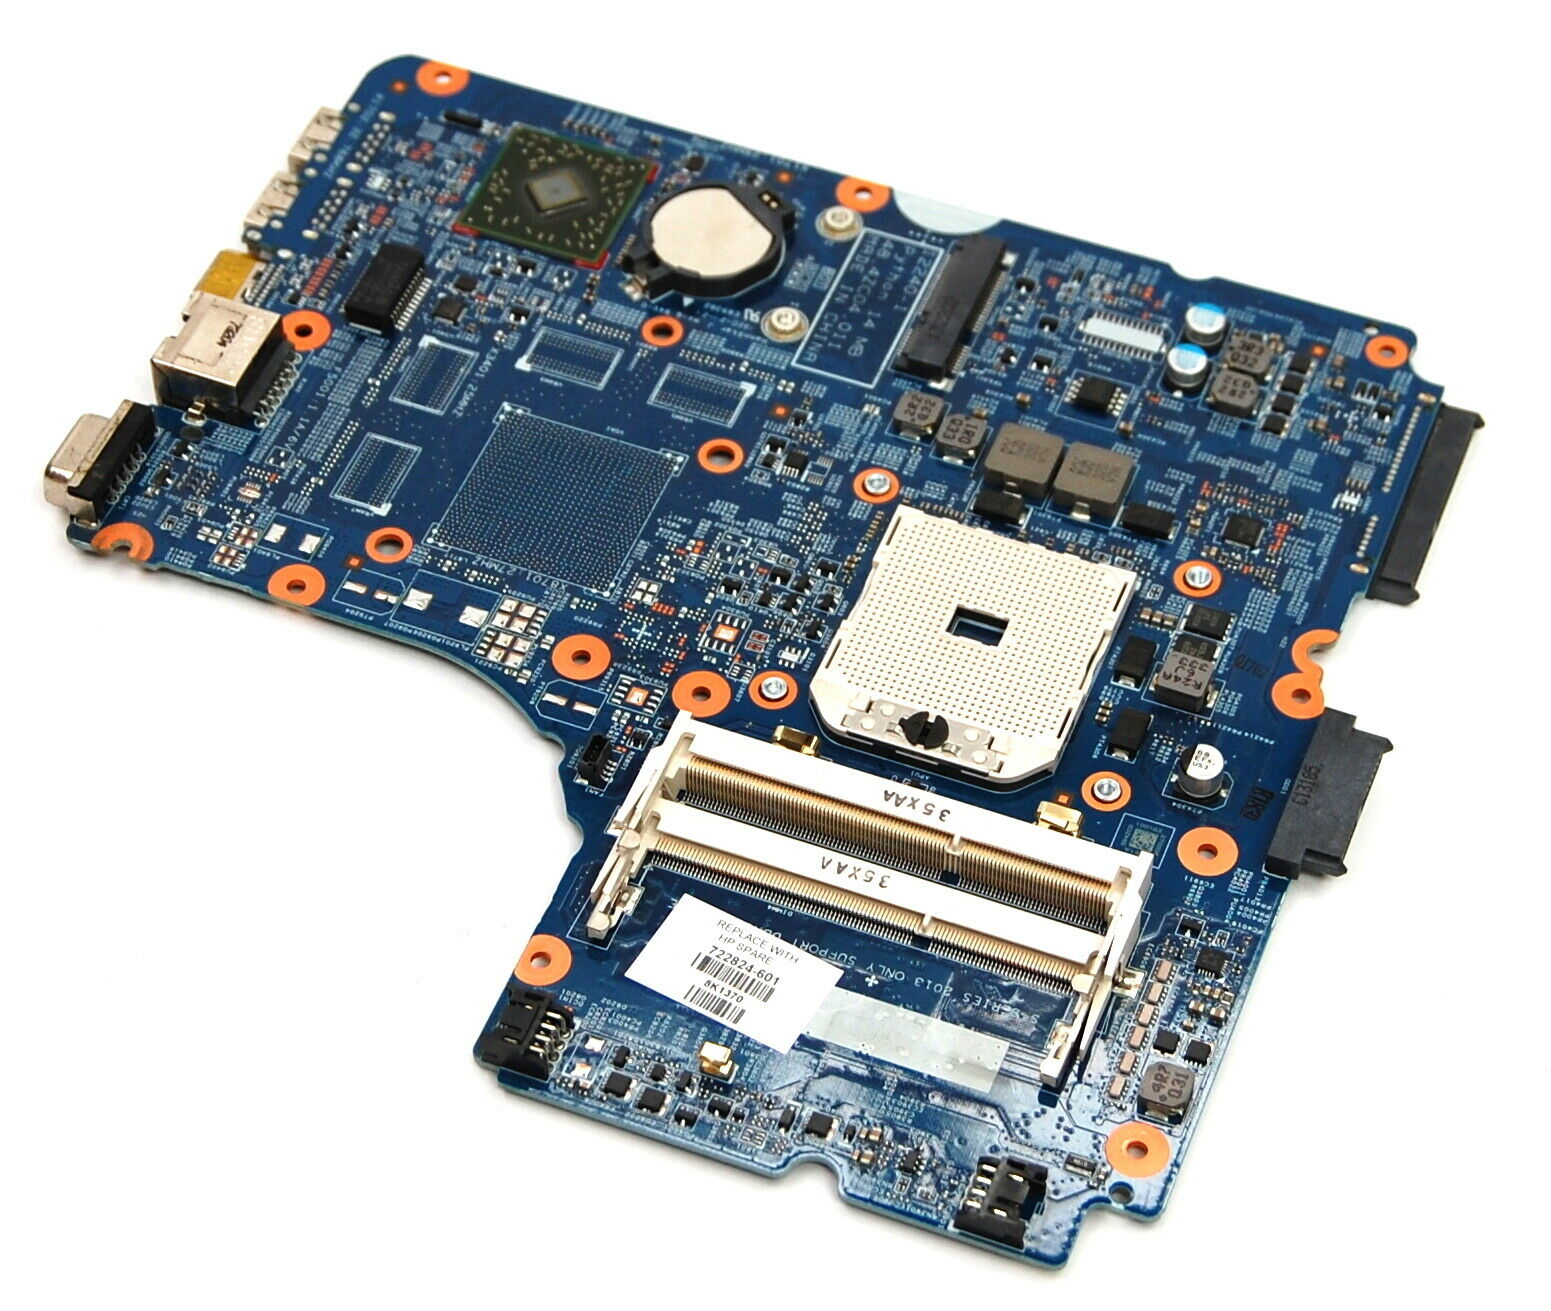 HP 722824-601 ProBook 455 G1 AMD Socket FS1 Laptop Motherboard All items are fully tested and working unles